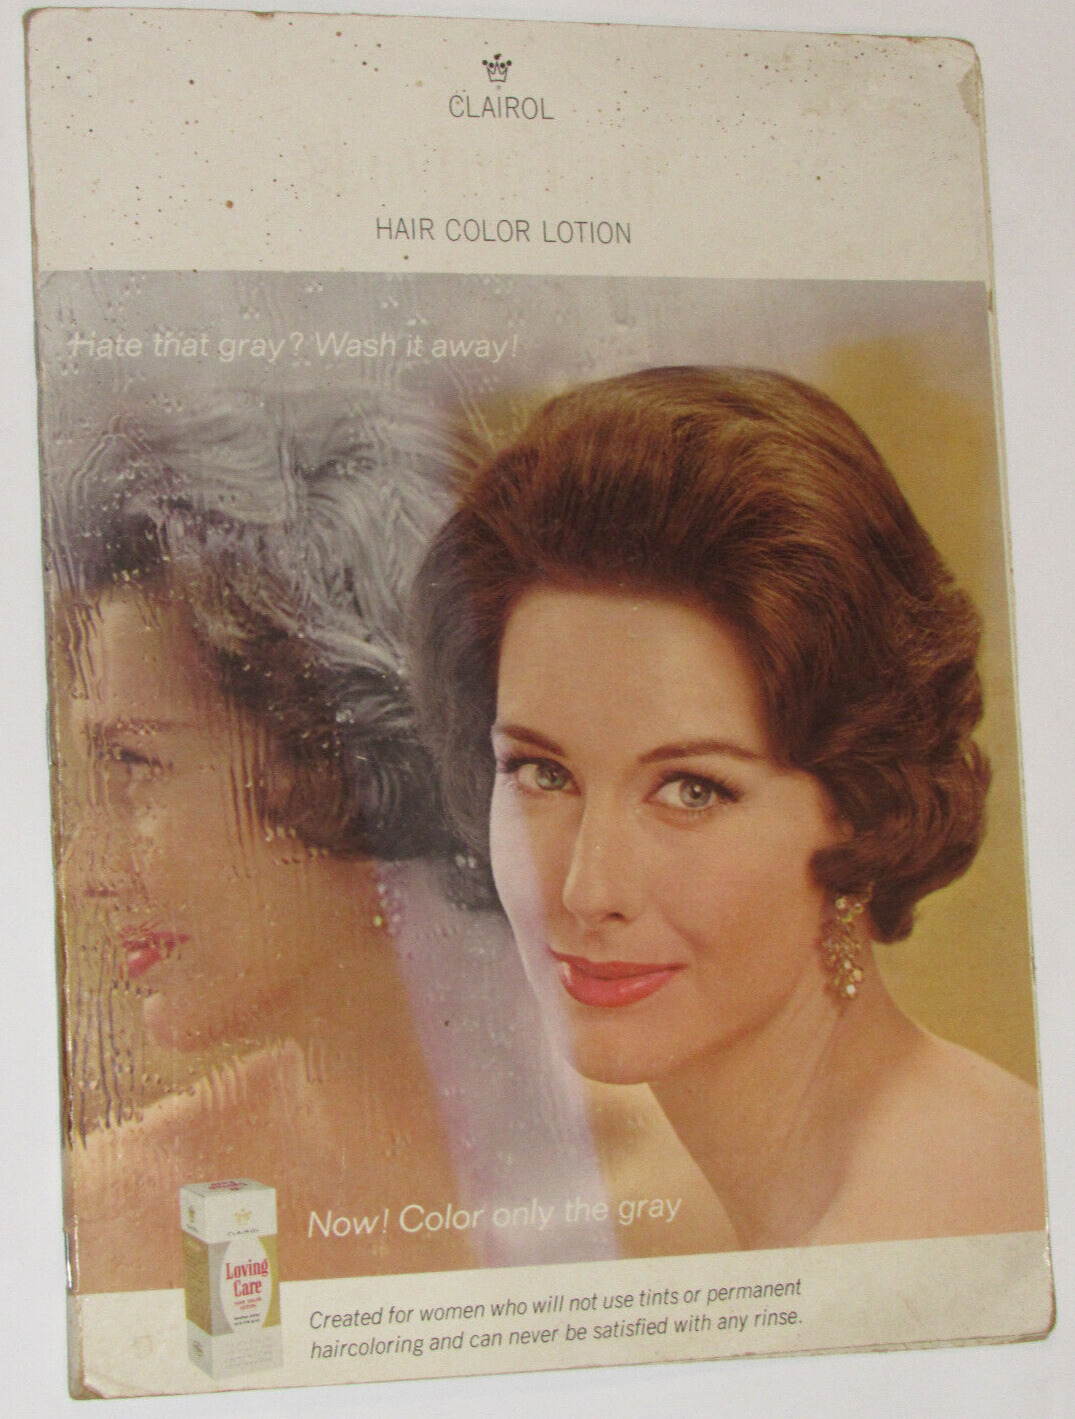 VINTAGE 1964 CLAIROL HAIR COLOR LOTION ADVERTING BEAUTY SHOP DISPLAY COLOR PICS